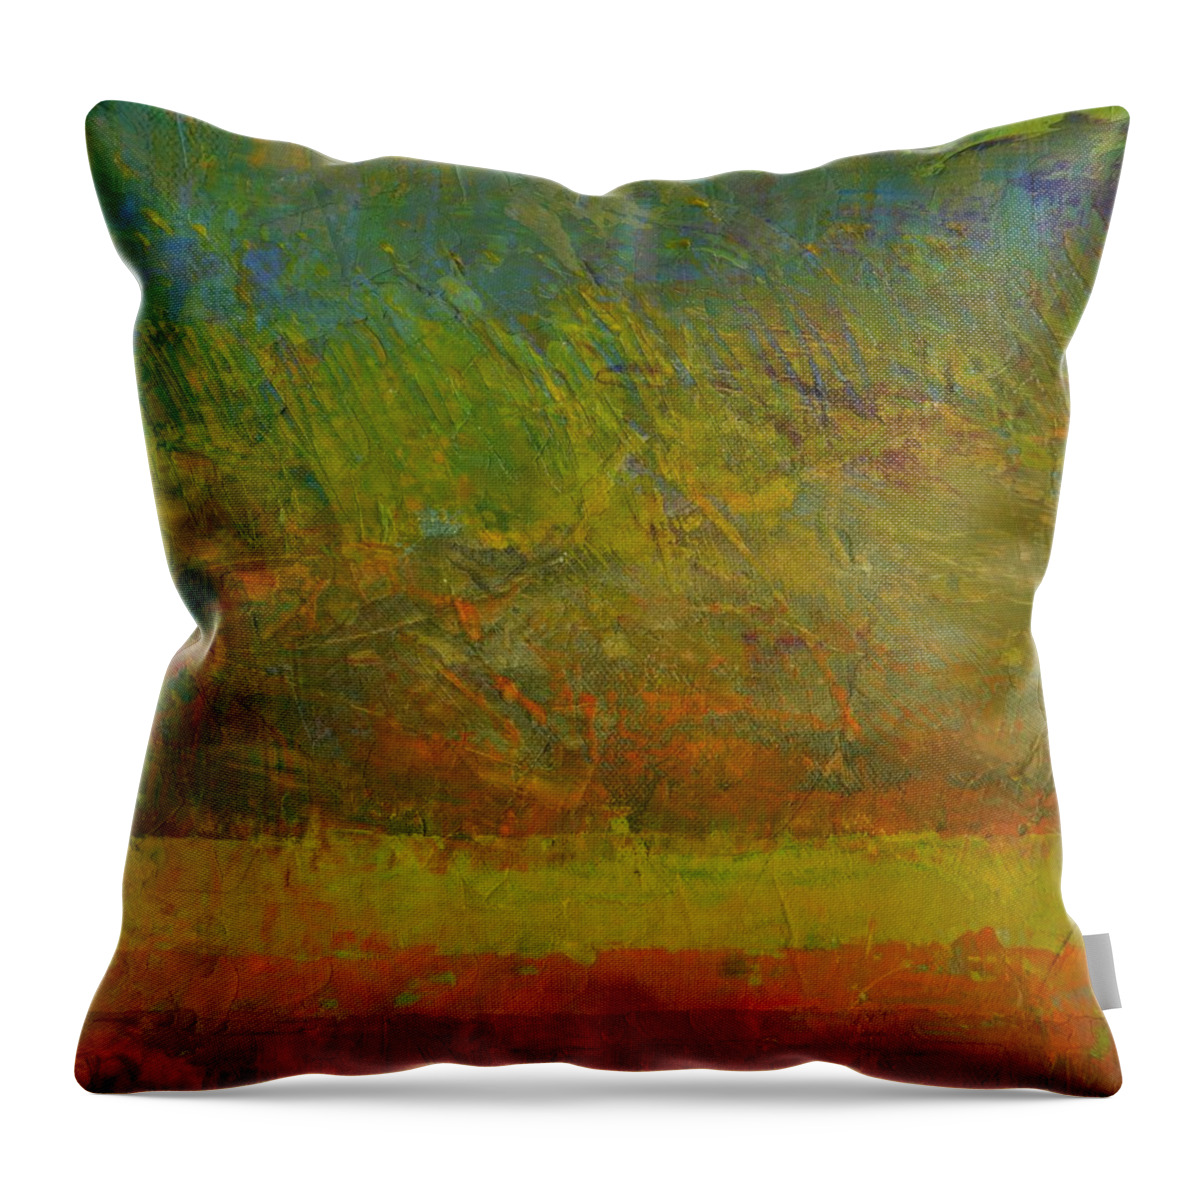 Stripes Throw Pillow featuring the painting Abstract Landscape Series - Golden Dawn by Michelle Calkins